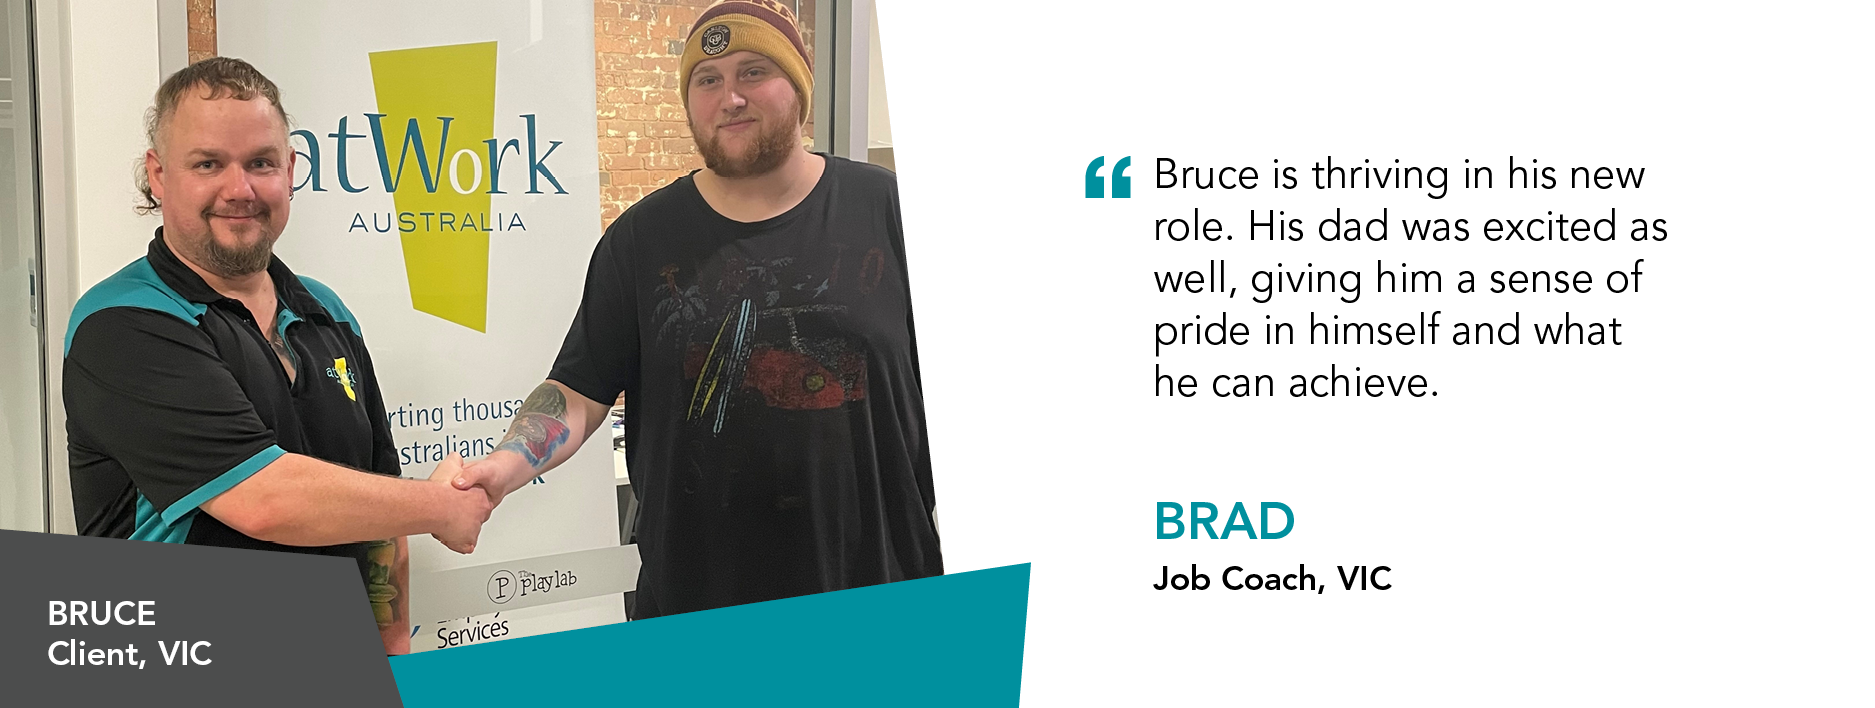 Quote reads "Bruce is thriving in his new role. His dad was excited as well, giving him a sense of pride in himself and what he can achieve." Brad Job Coach Victoria